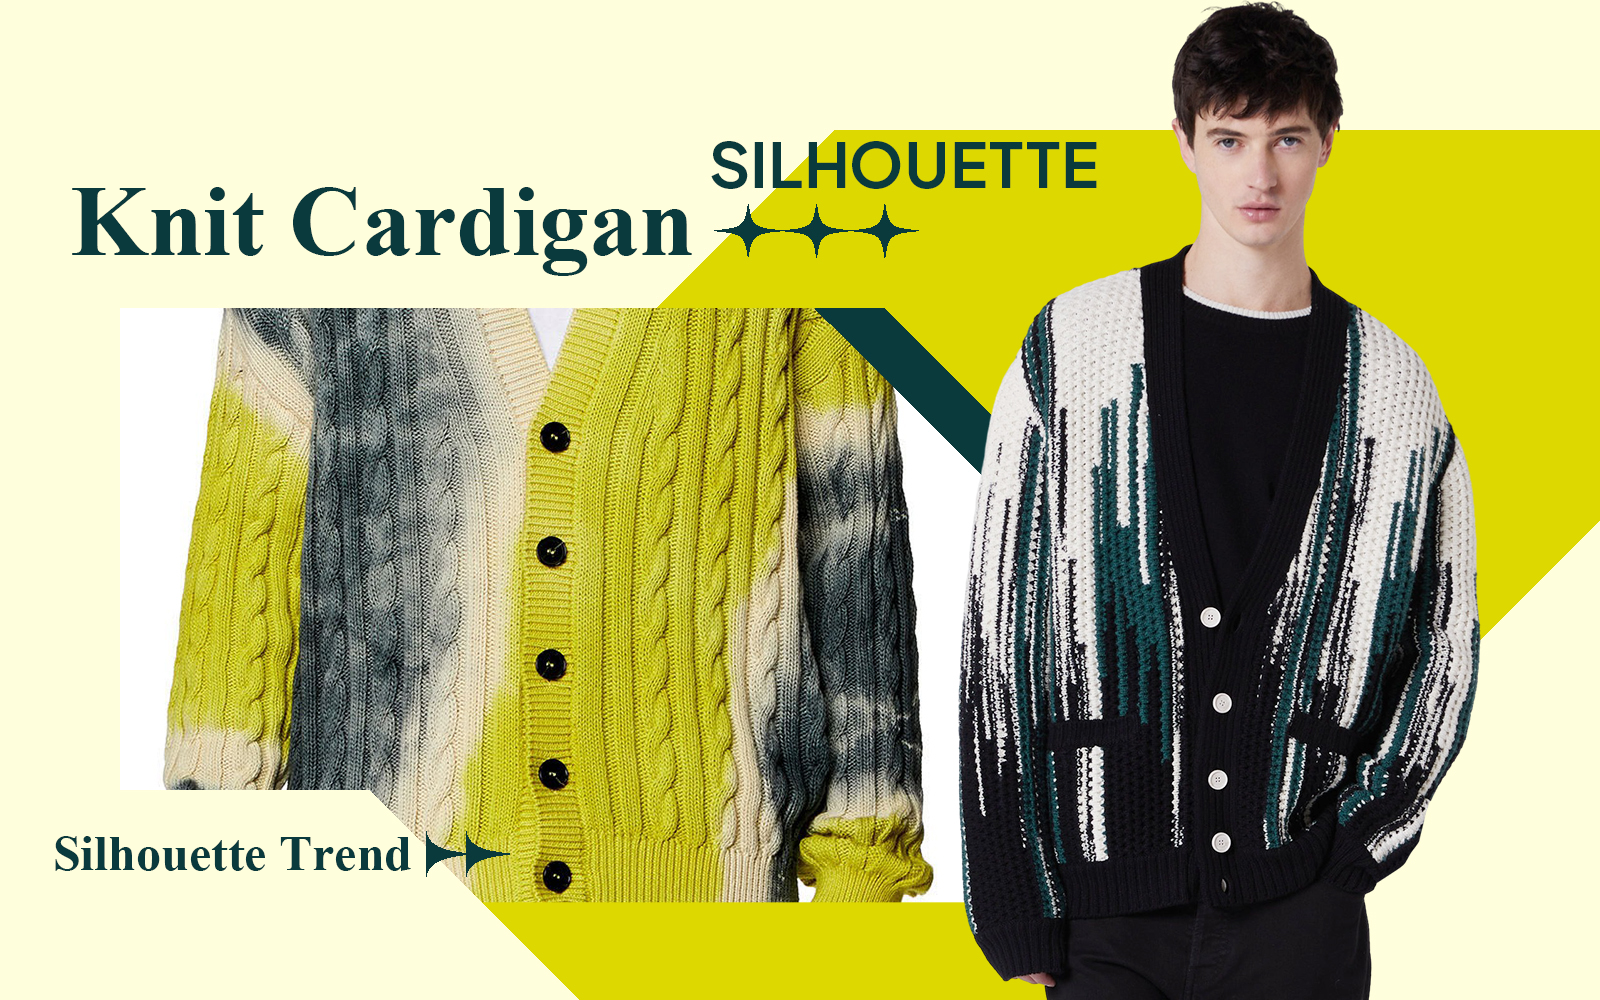 Fashionable Cardigan -- S/S 2025 Silhouette Trend for Men's Knitwear